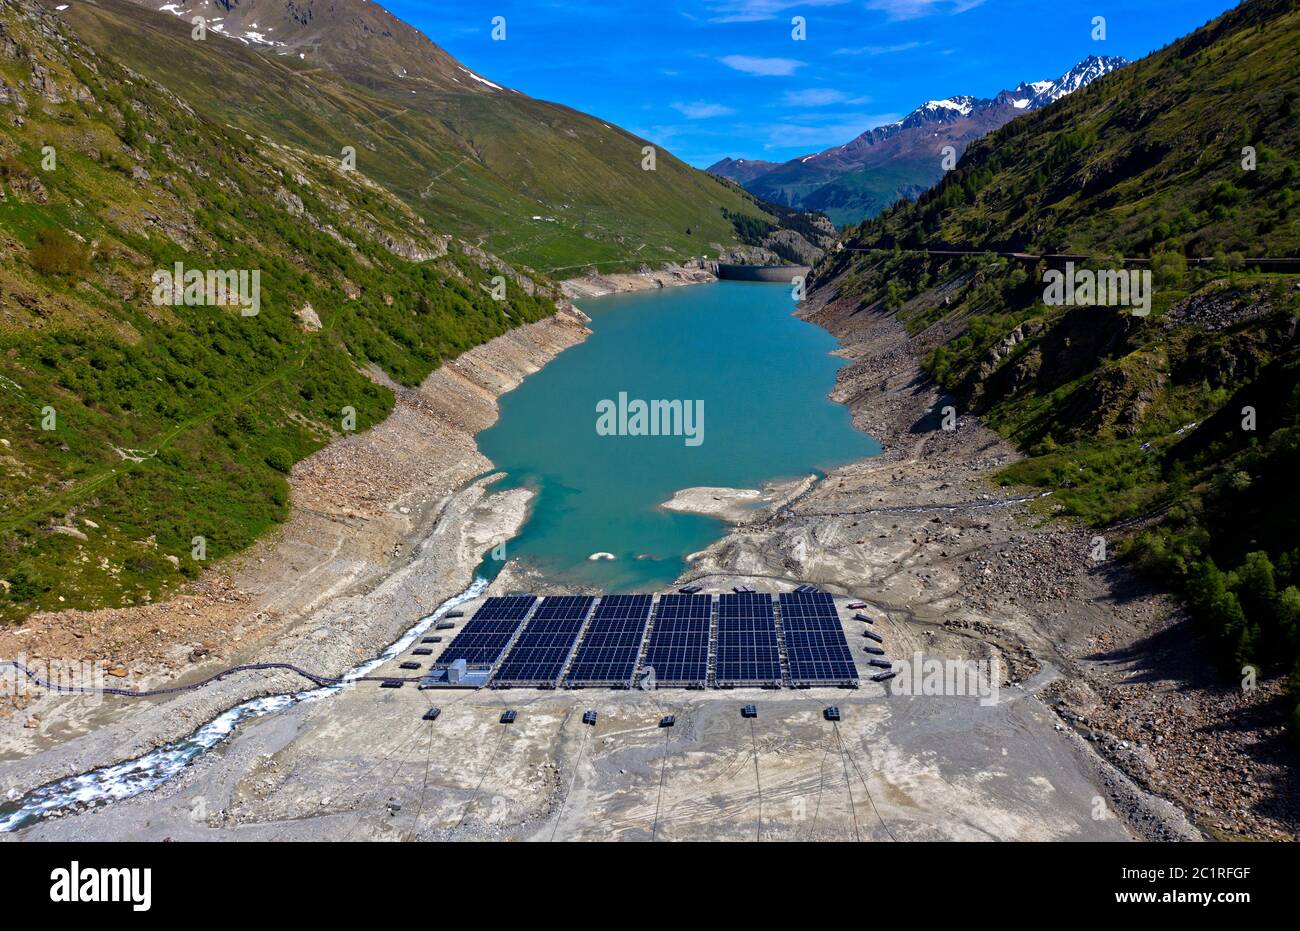 Low water levels impair the operation of the first floating alpine solar power plant, the Lac des Toules, Bourg-St-Pierre, Valais, Switzerland Stock Photo